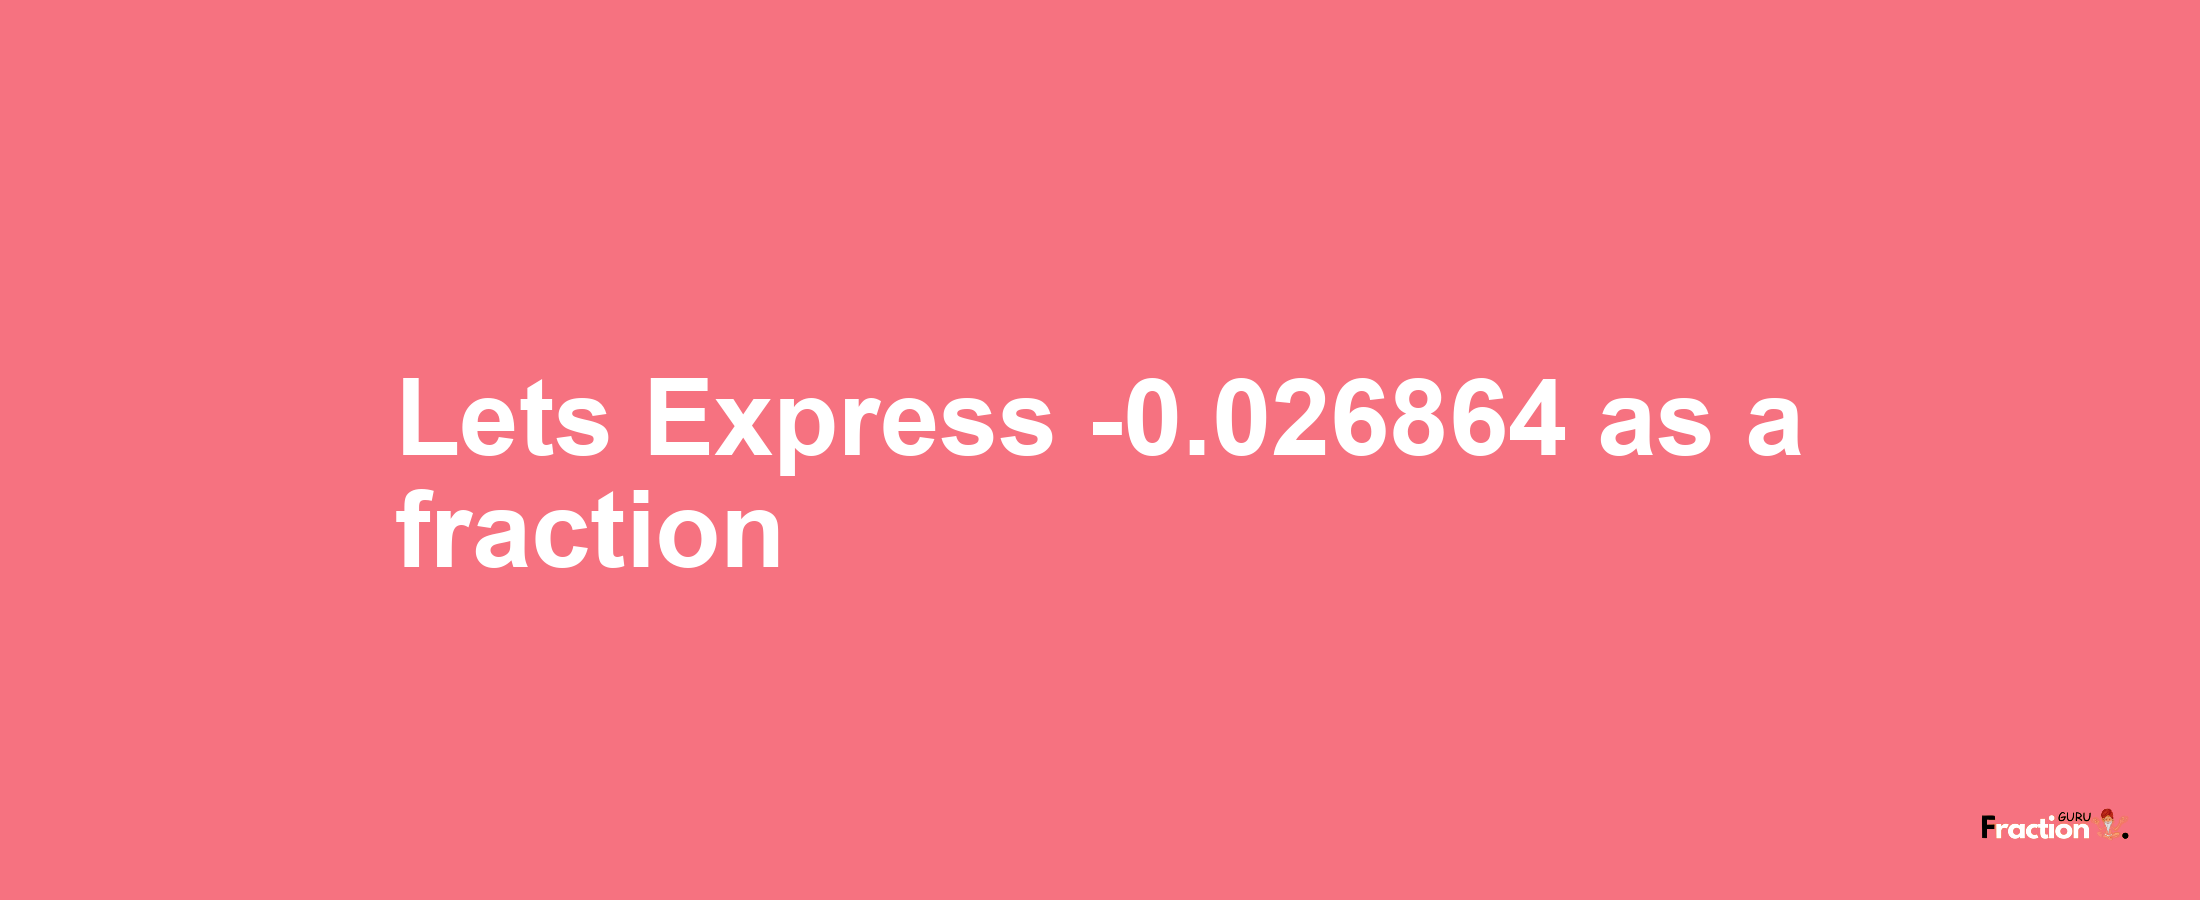 Lets Express -0.026864 as afraction